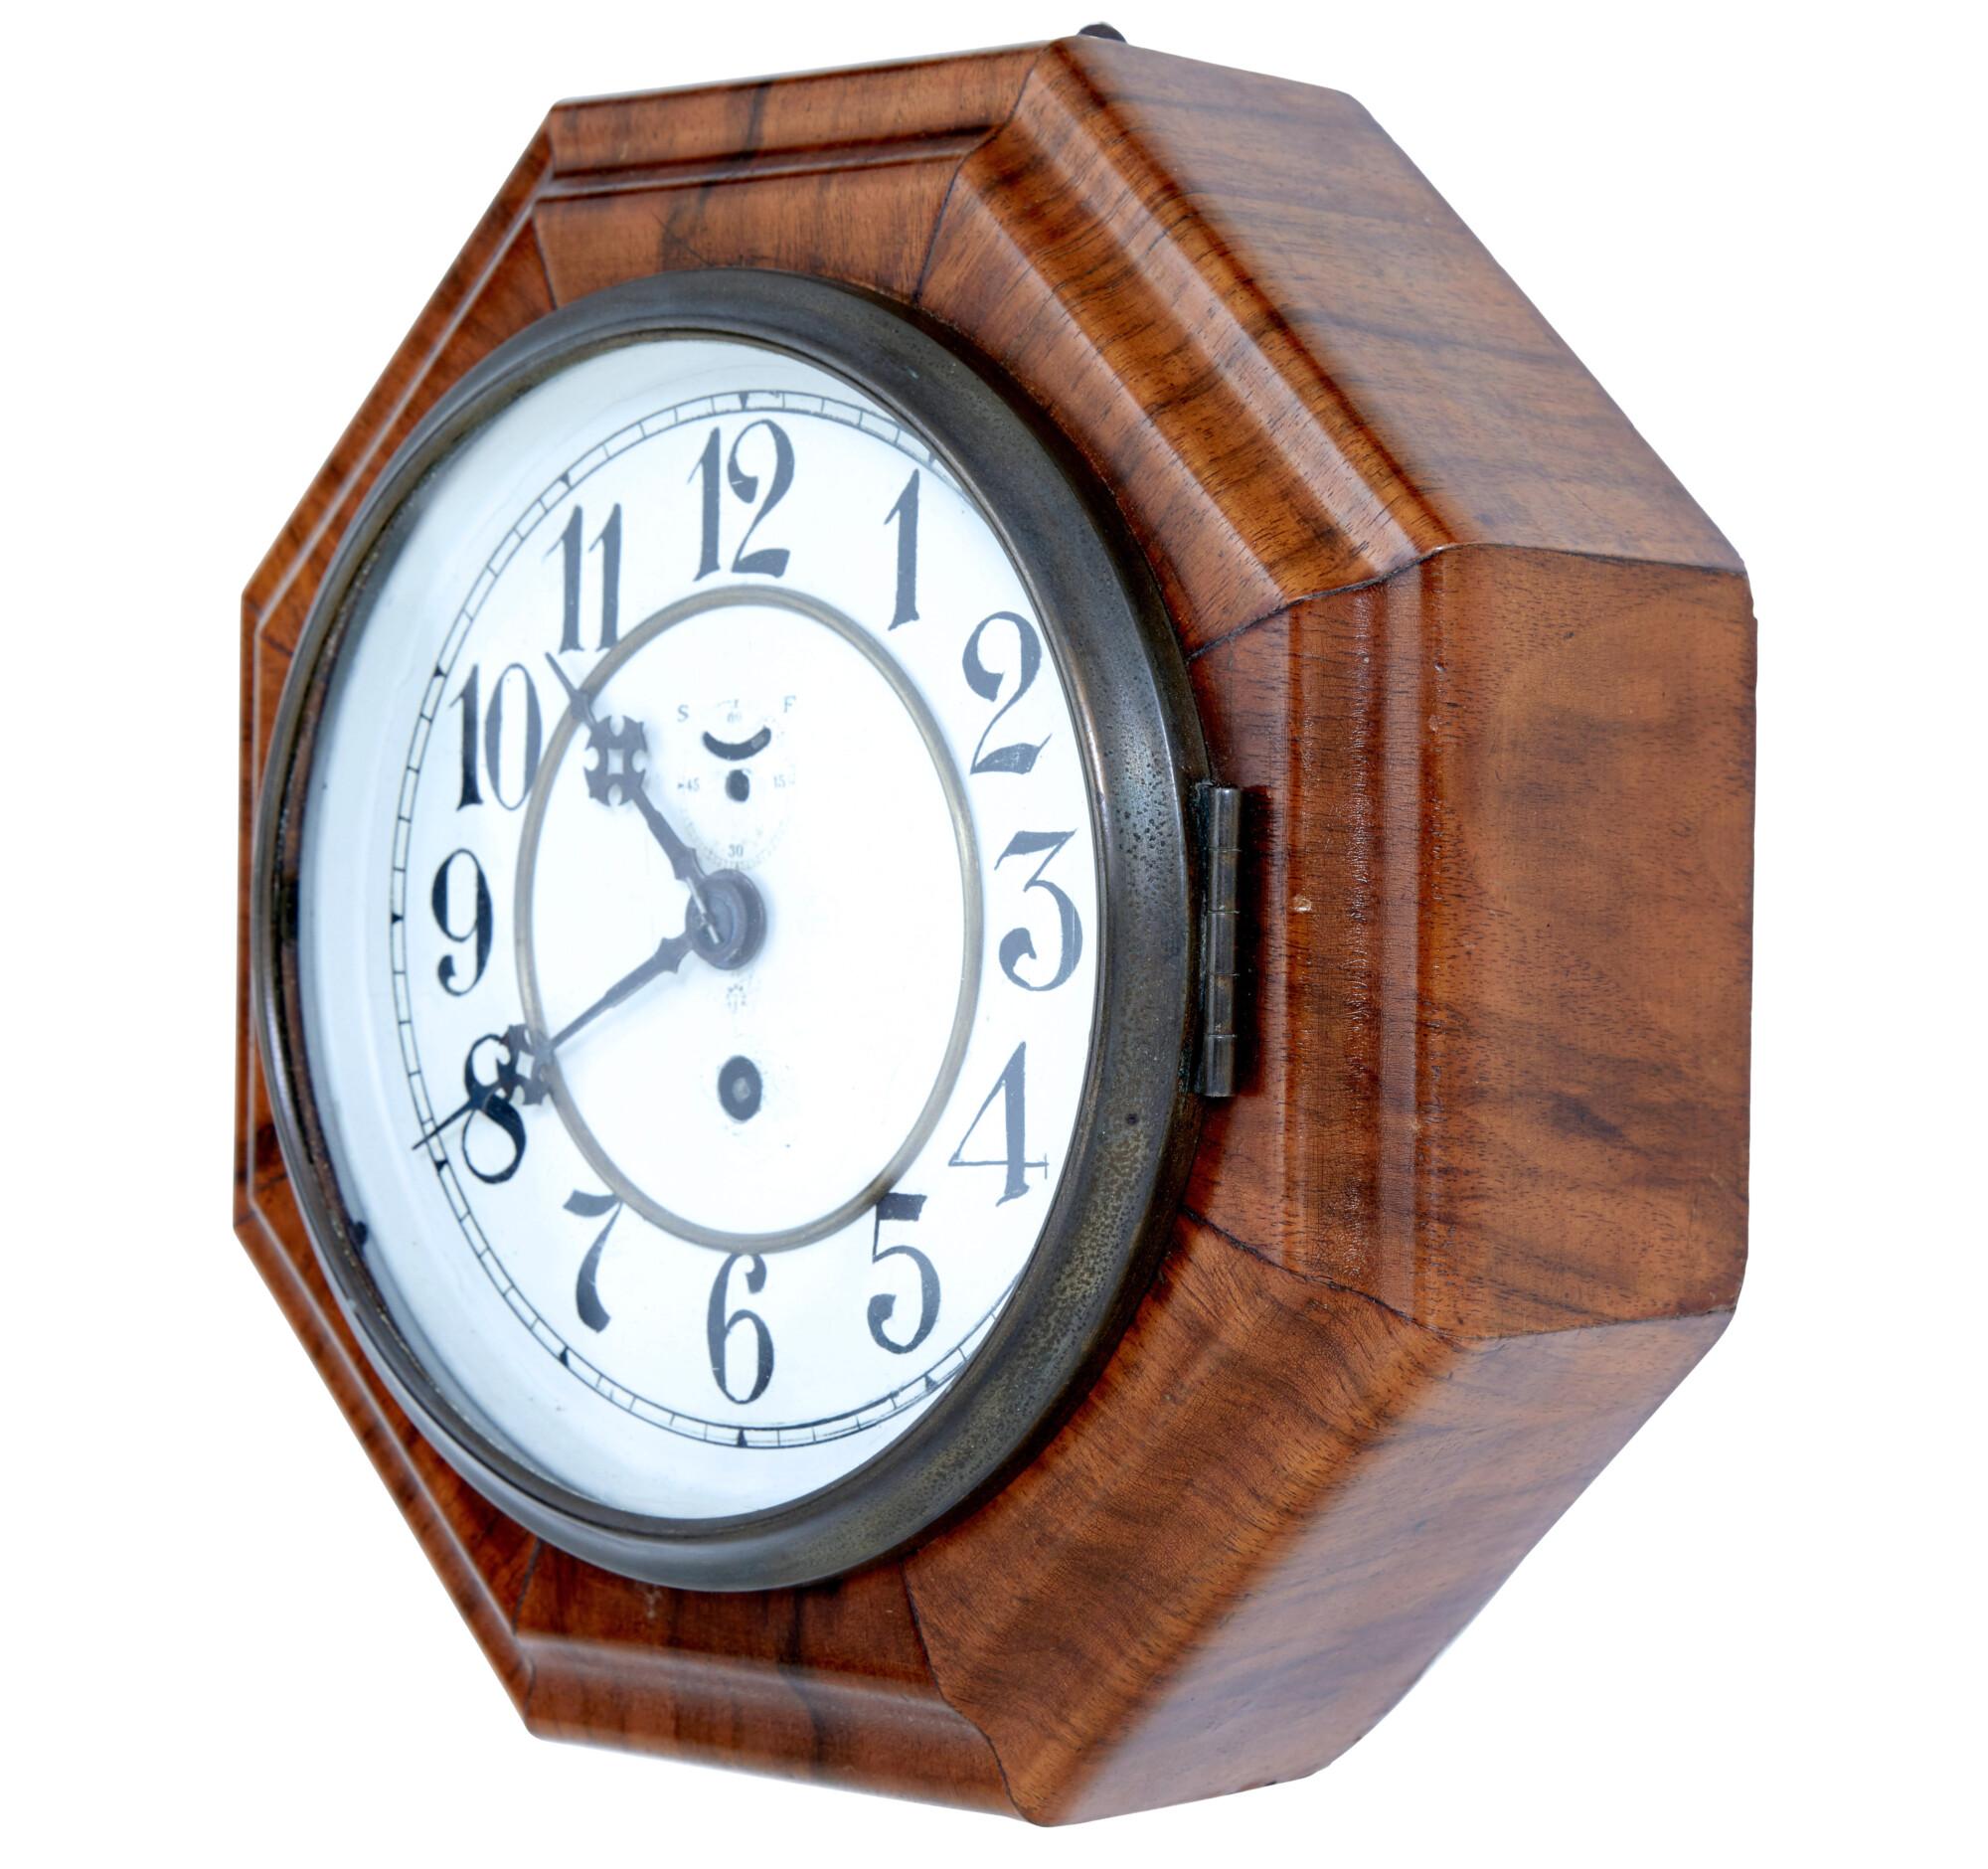 Art Deco period walnut octagonal wall clock by well known German clock maker Junghans, circa 1920. Celebrate the timeless elegance of the Art Deco era with this Walnut wall clock by Junghans, the renowned German clock maker. Crafted circa 1920, this